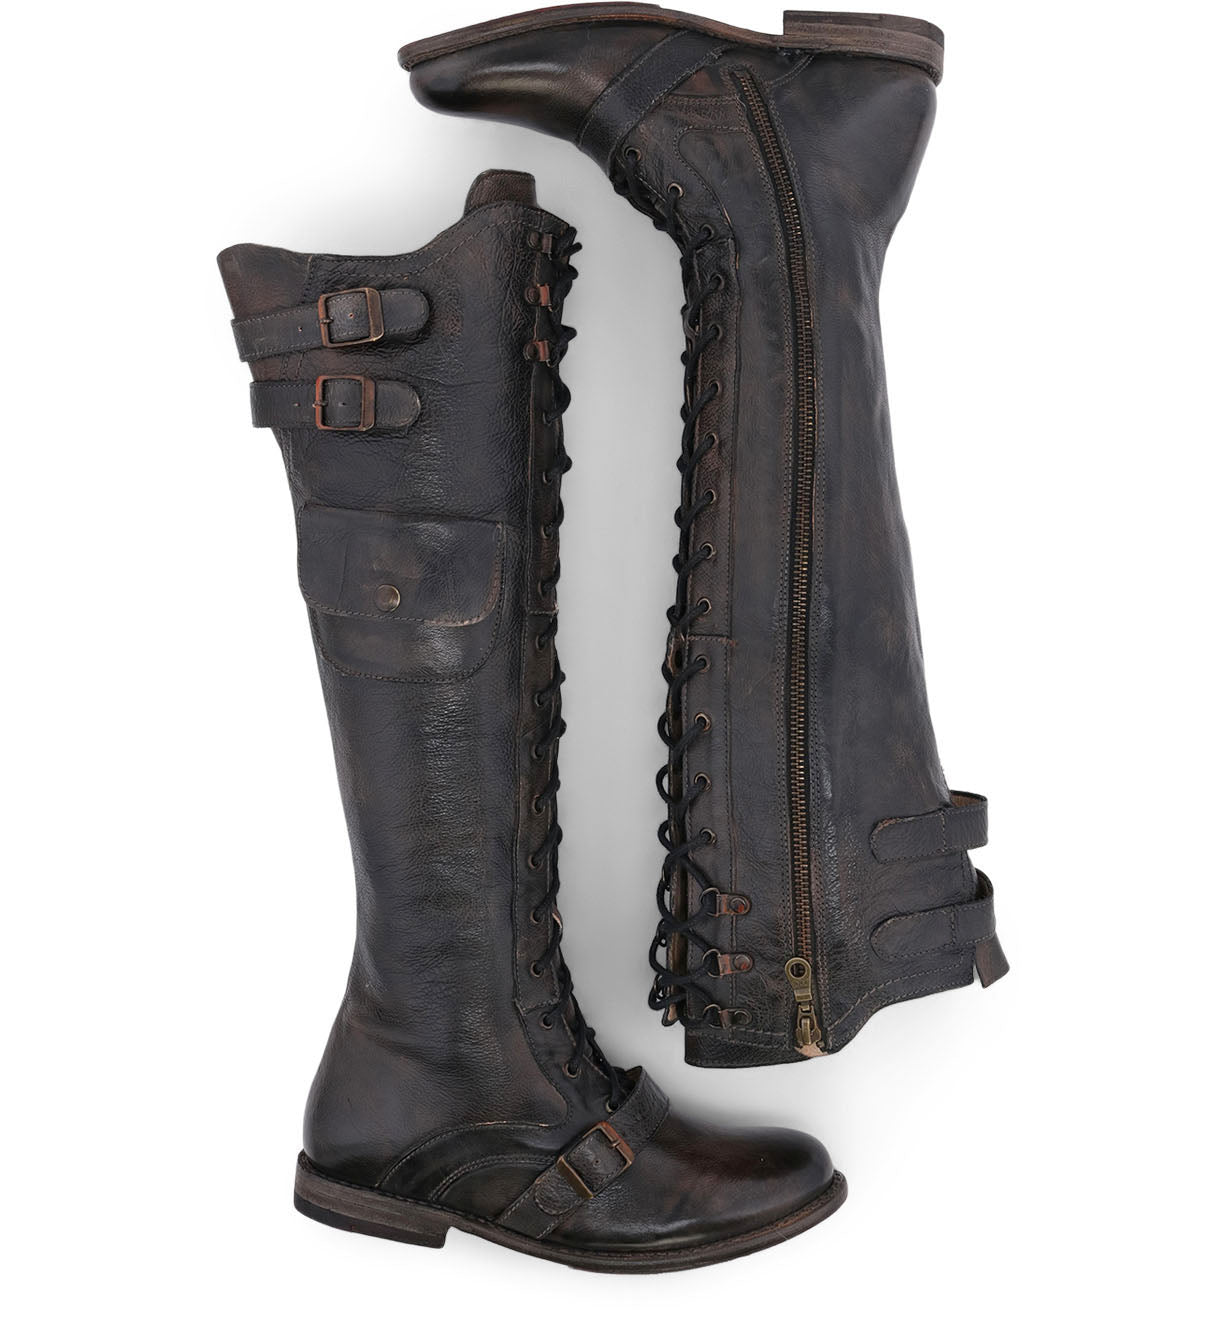 A pair of Oak Tree Farms black boots with vegetable tanned leather and buckles named Meryl.